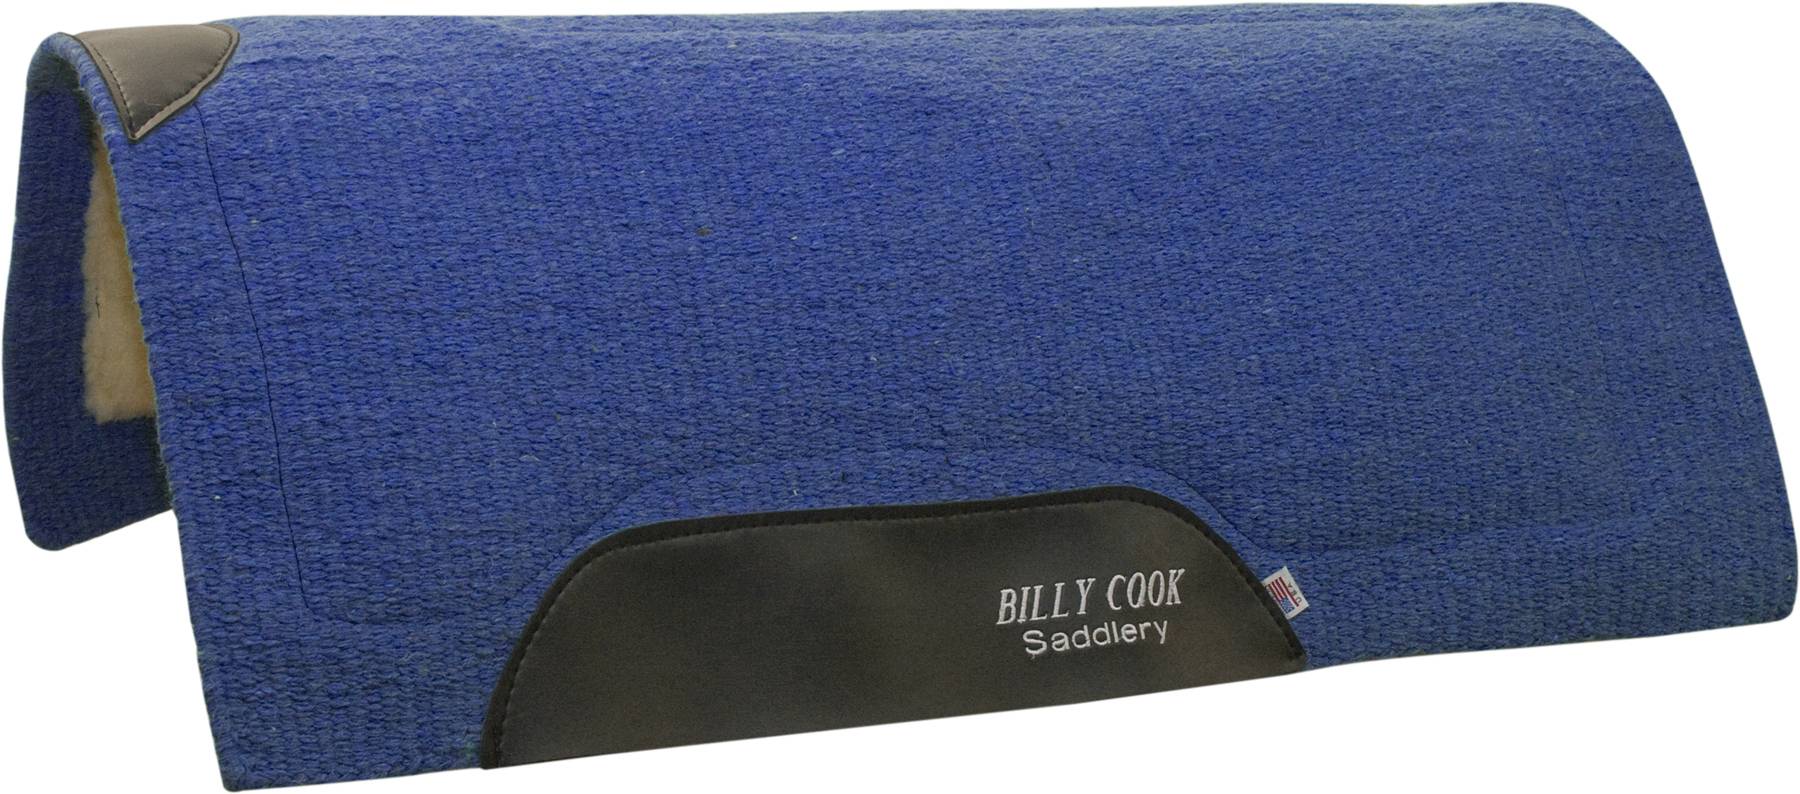 Billy Cook Saddlery Solid Show Pad